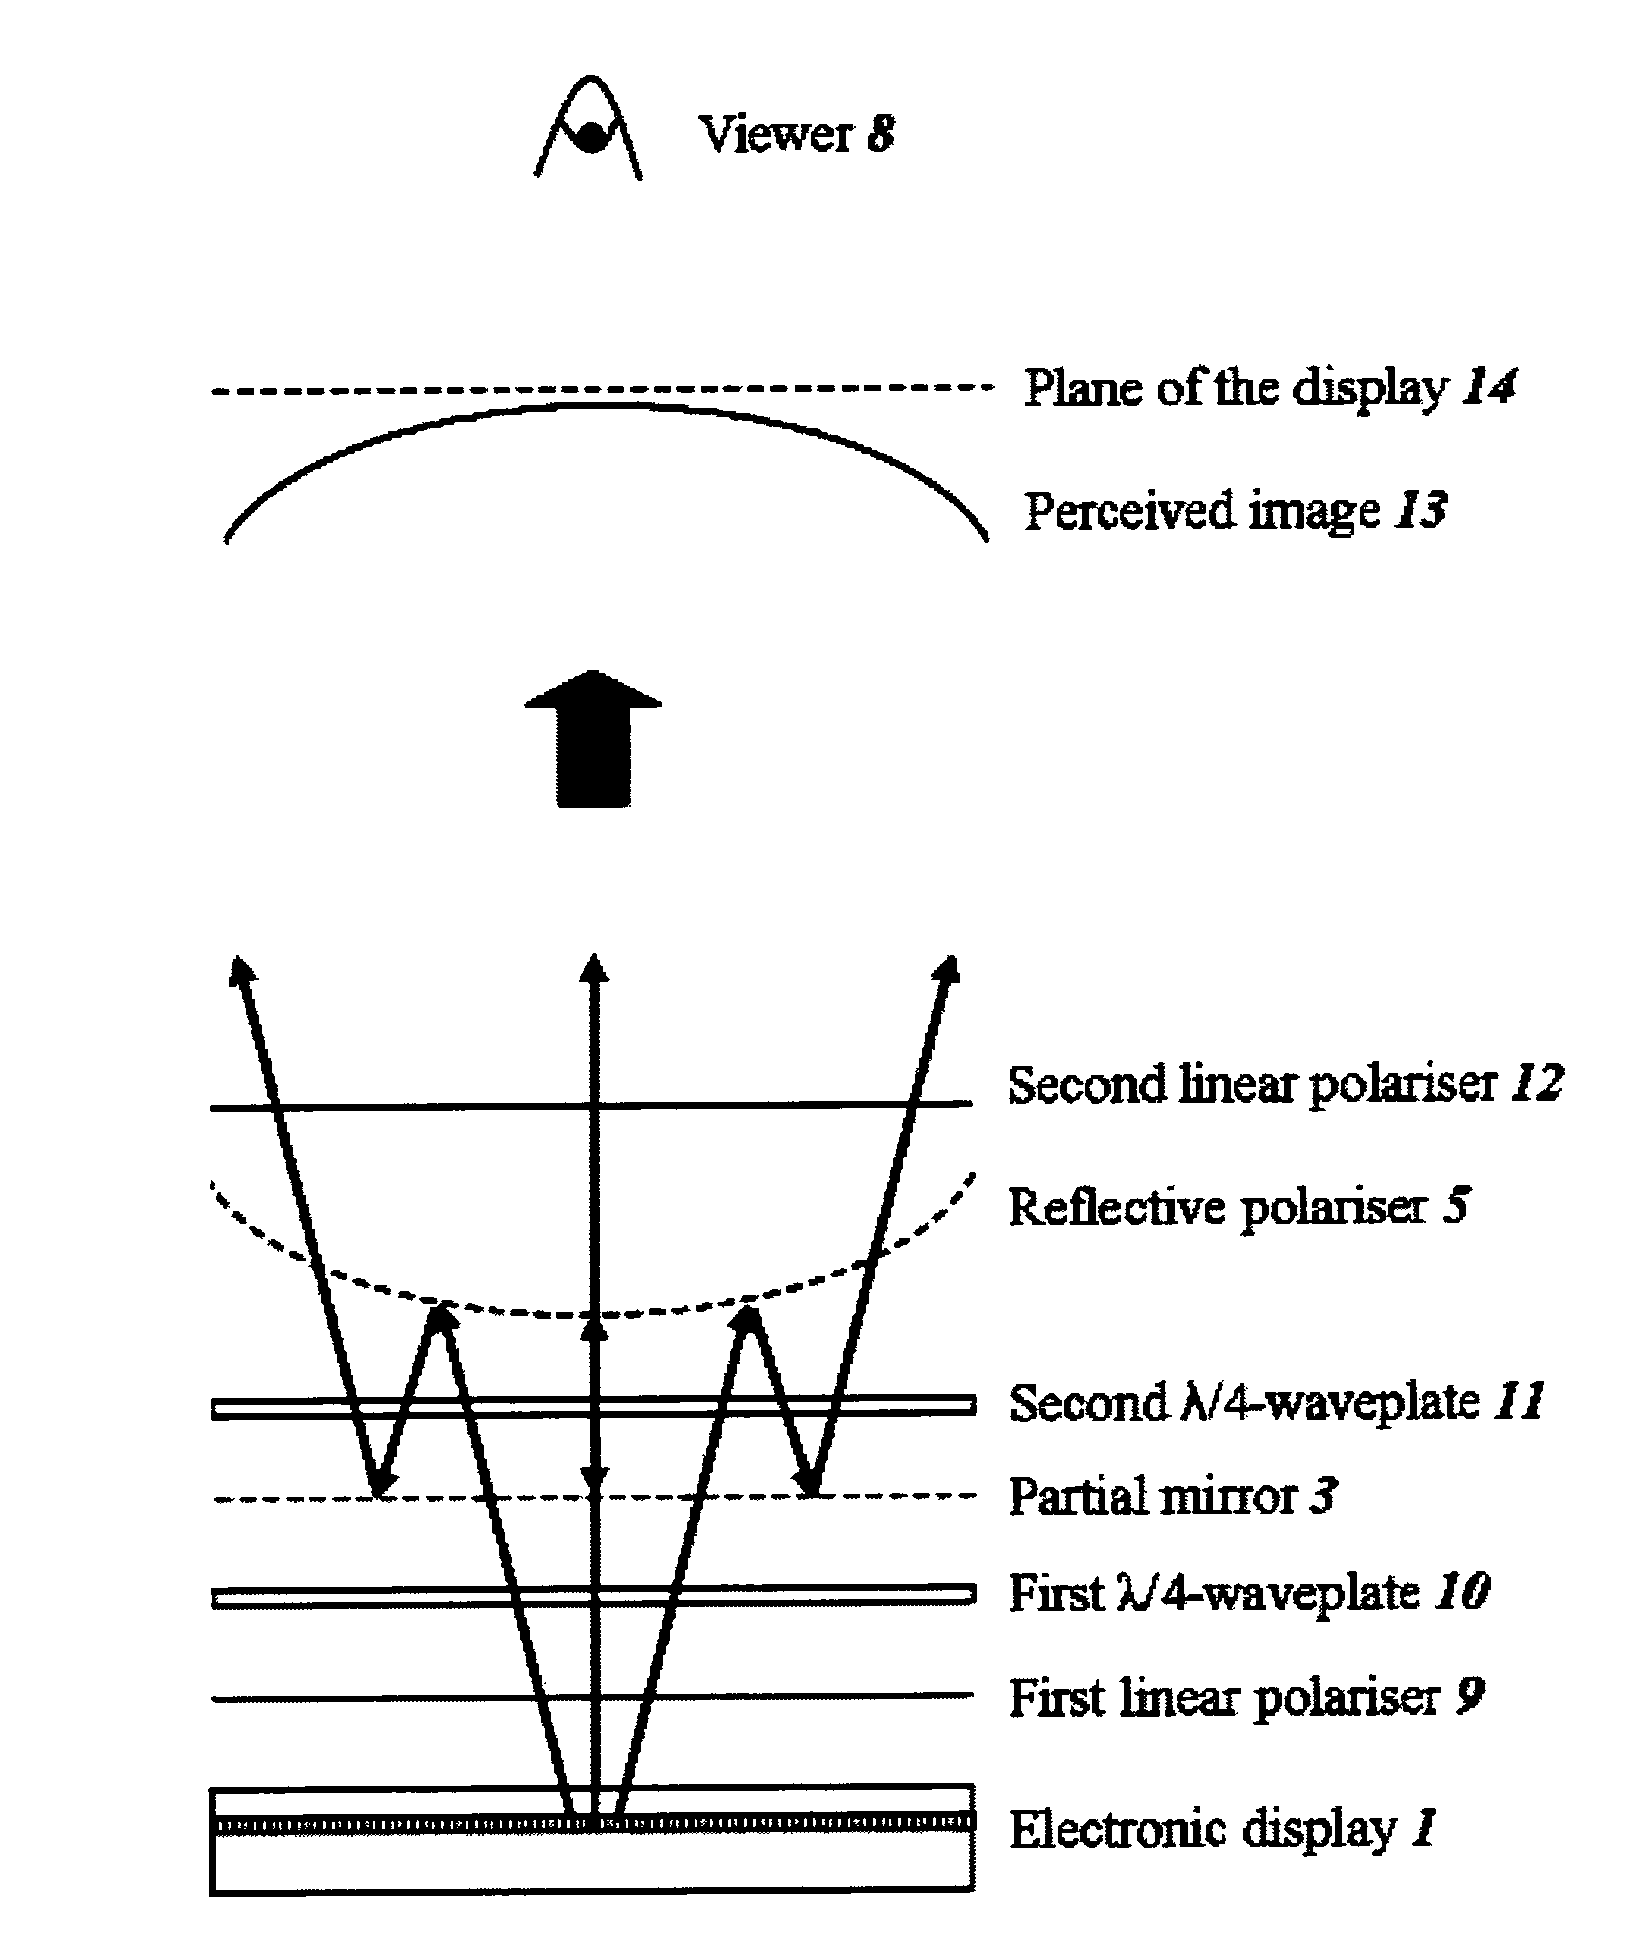 Optical system and display that converts a flat image to a non-flat image